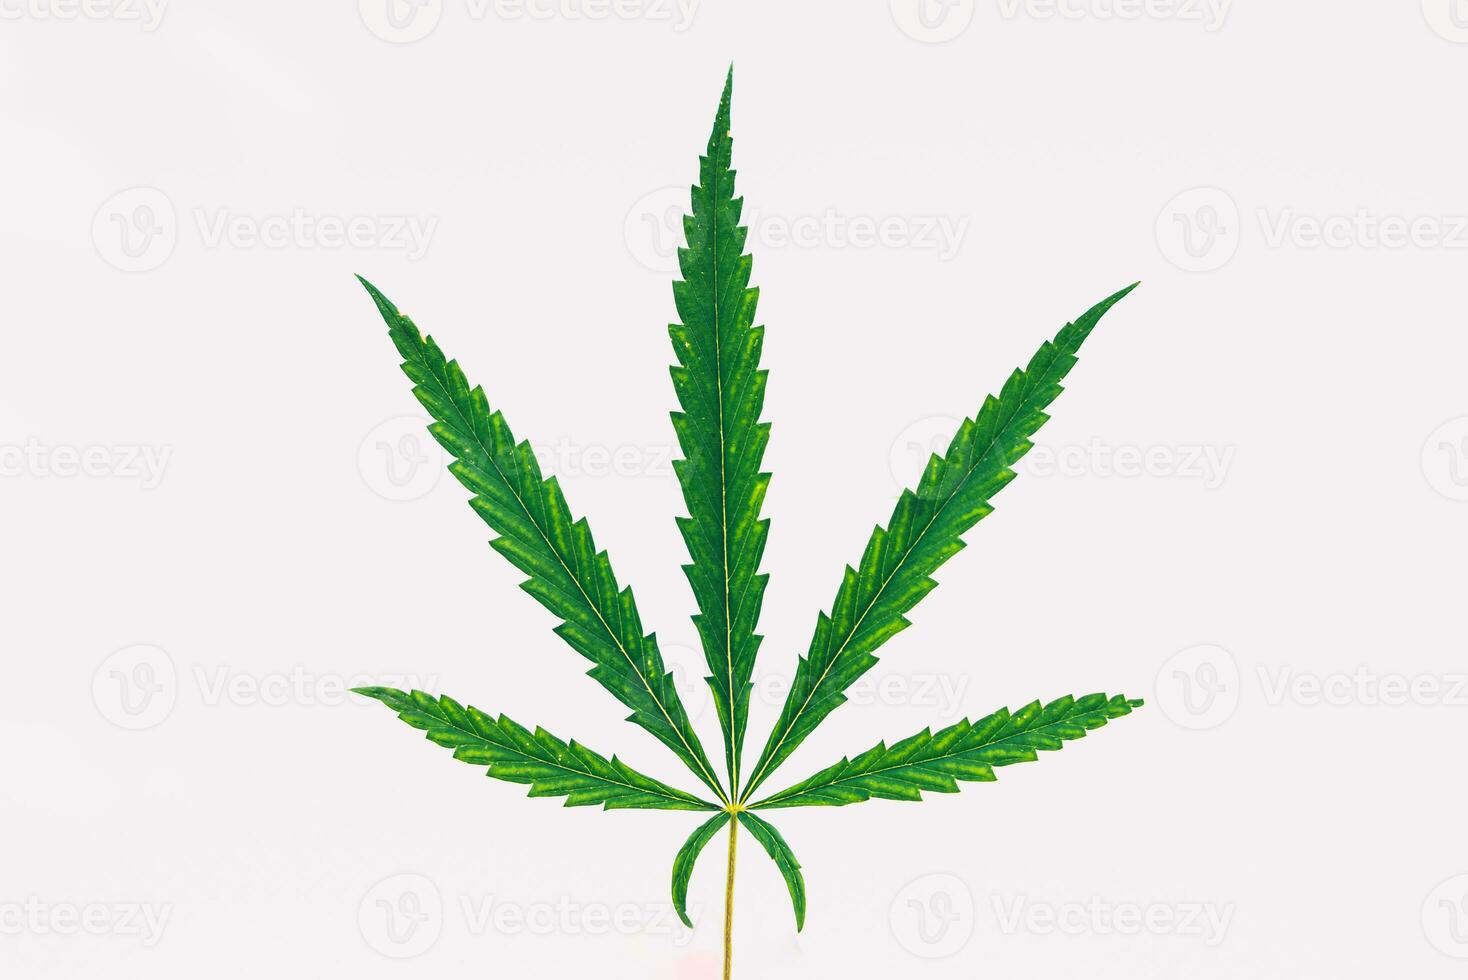 Cannabis leaf on a white background. Close-up photo